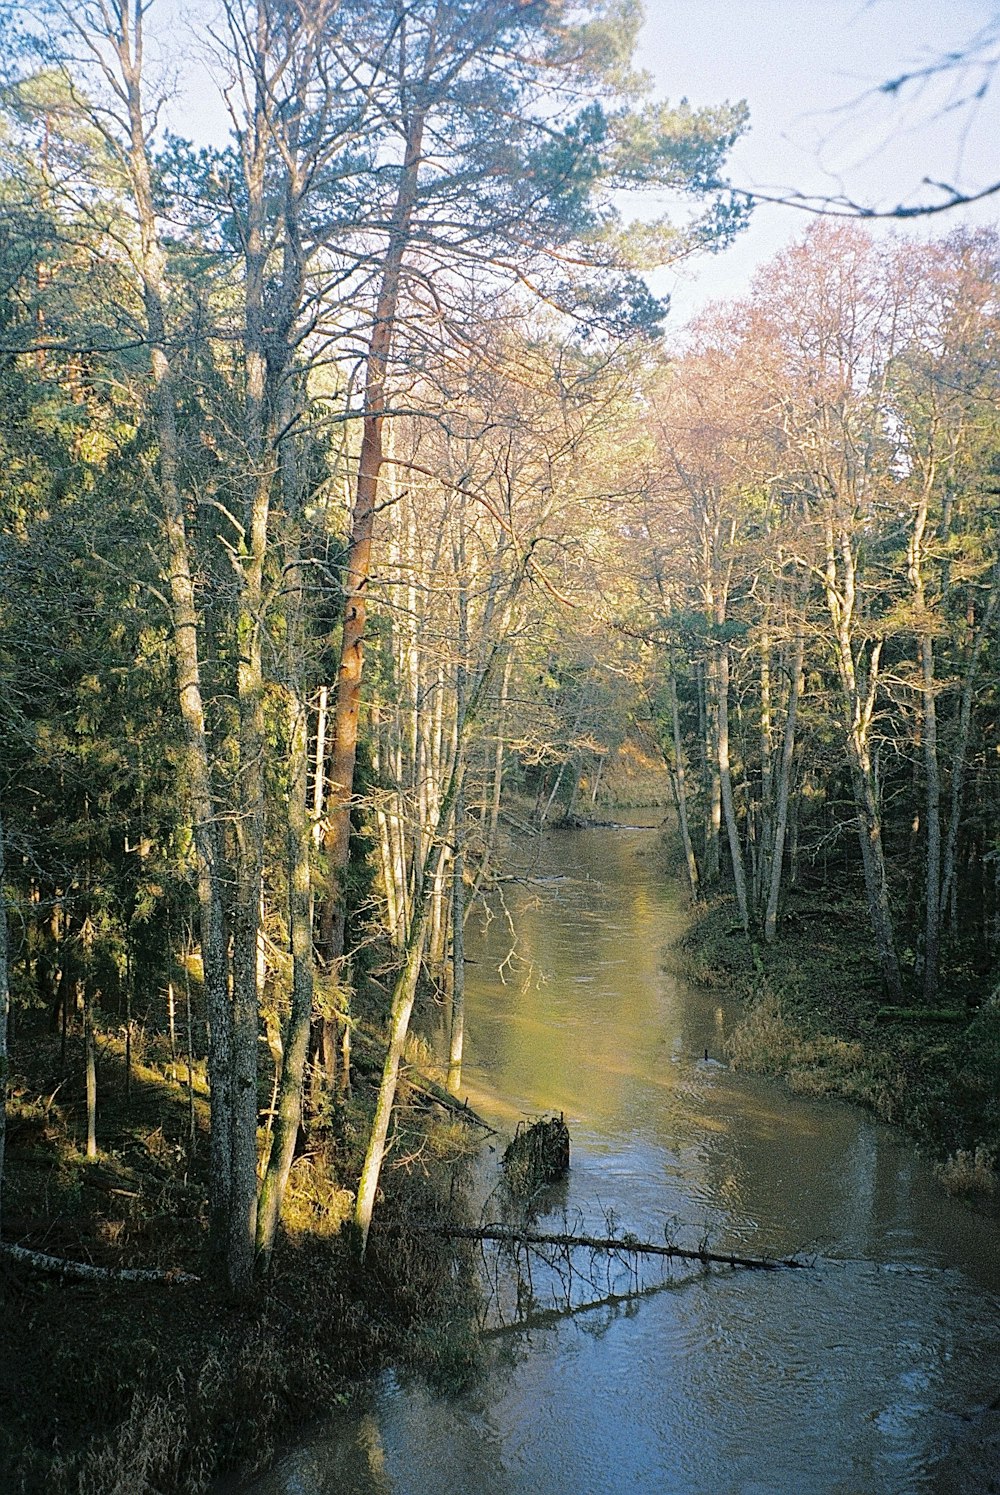 a river running through a forest filled with lots of trees